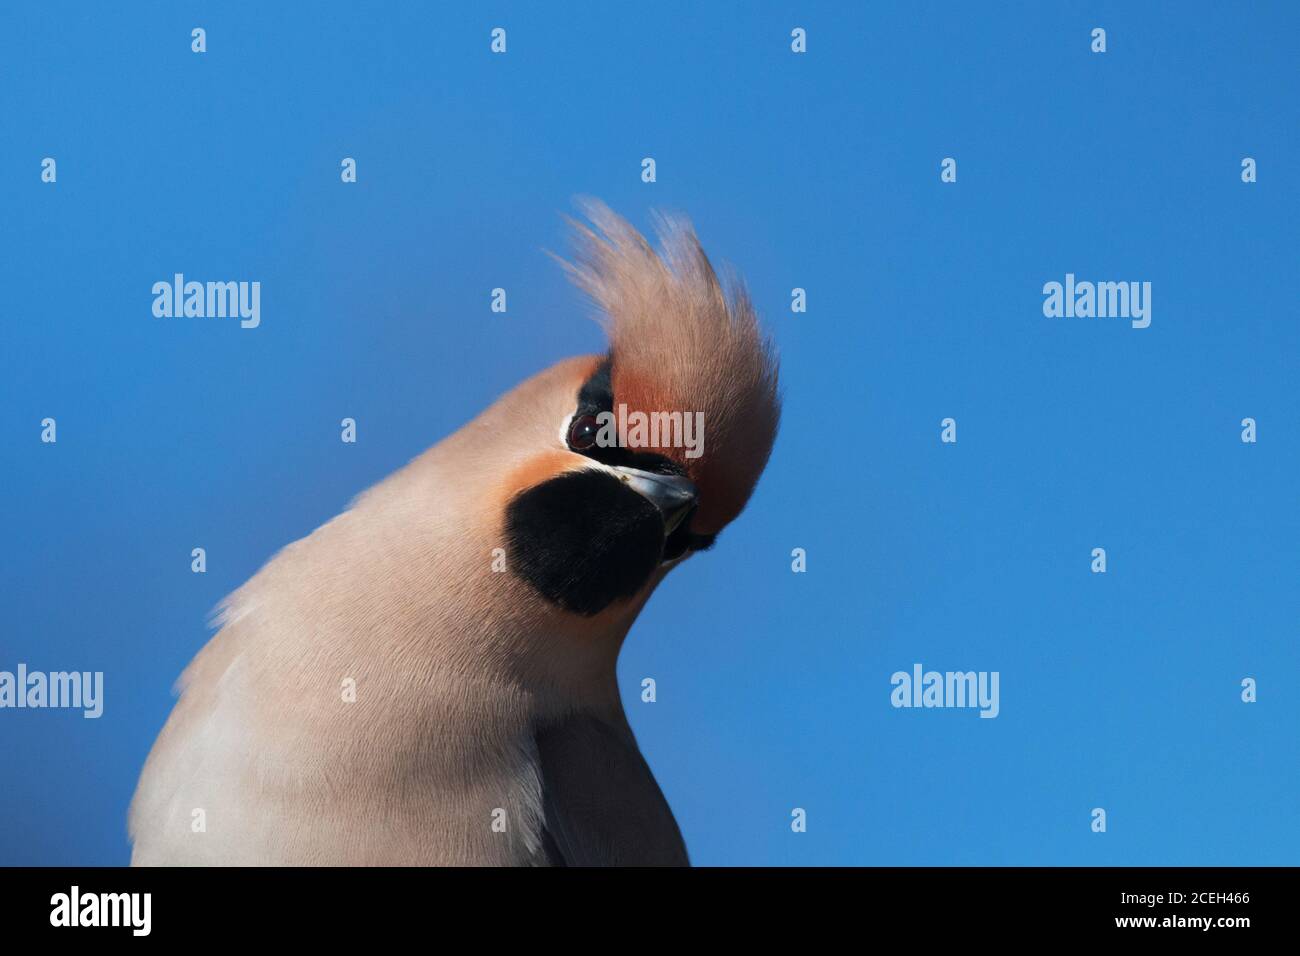 A portrait of a colorful European Northern songbird Bohemian waxwing, Bombycilla garrulus during a winter migration in Estonia. Stock Photo